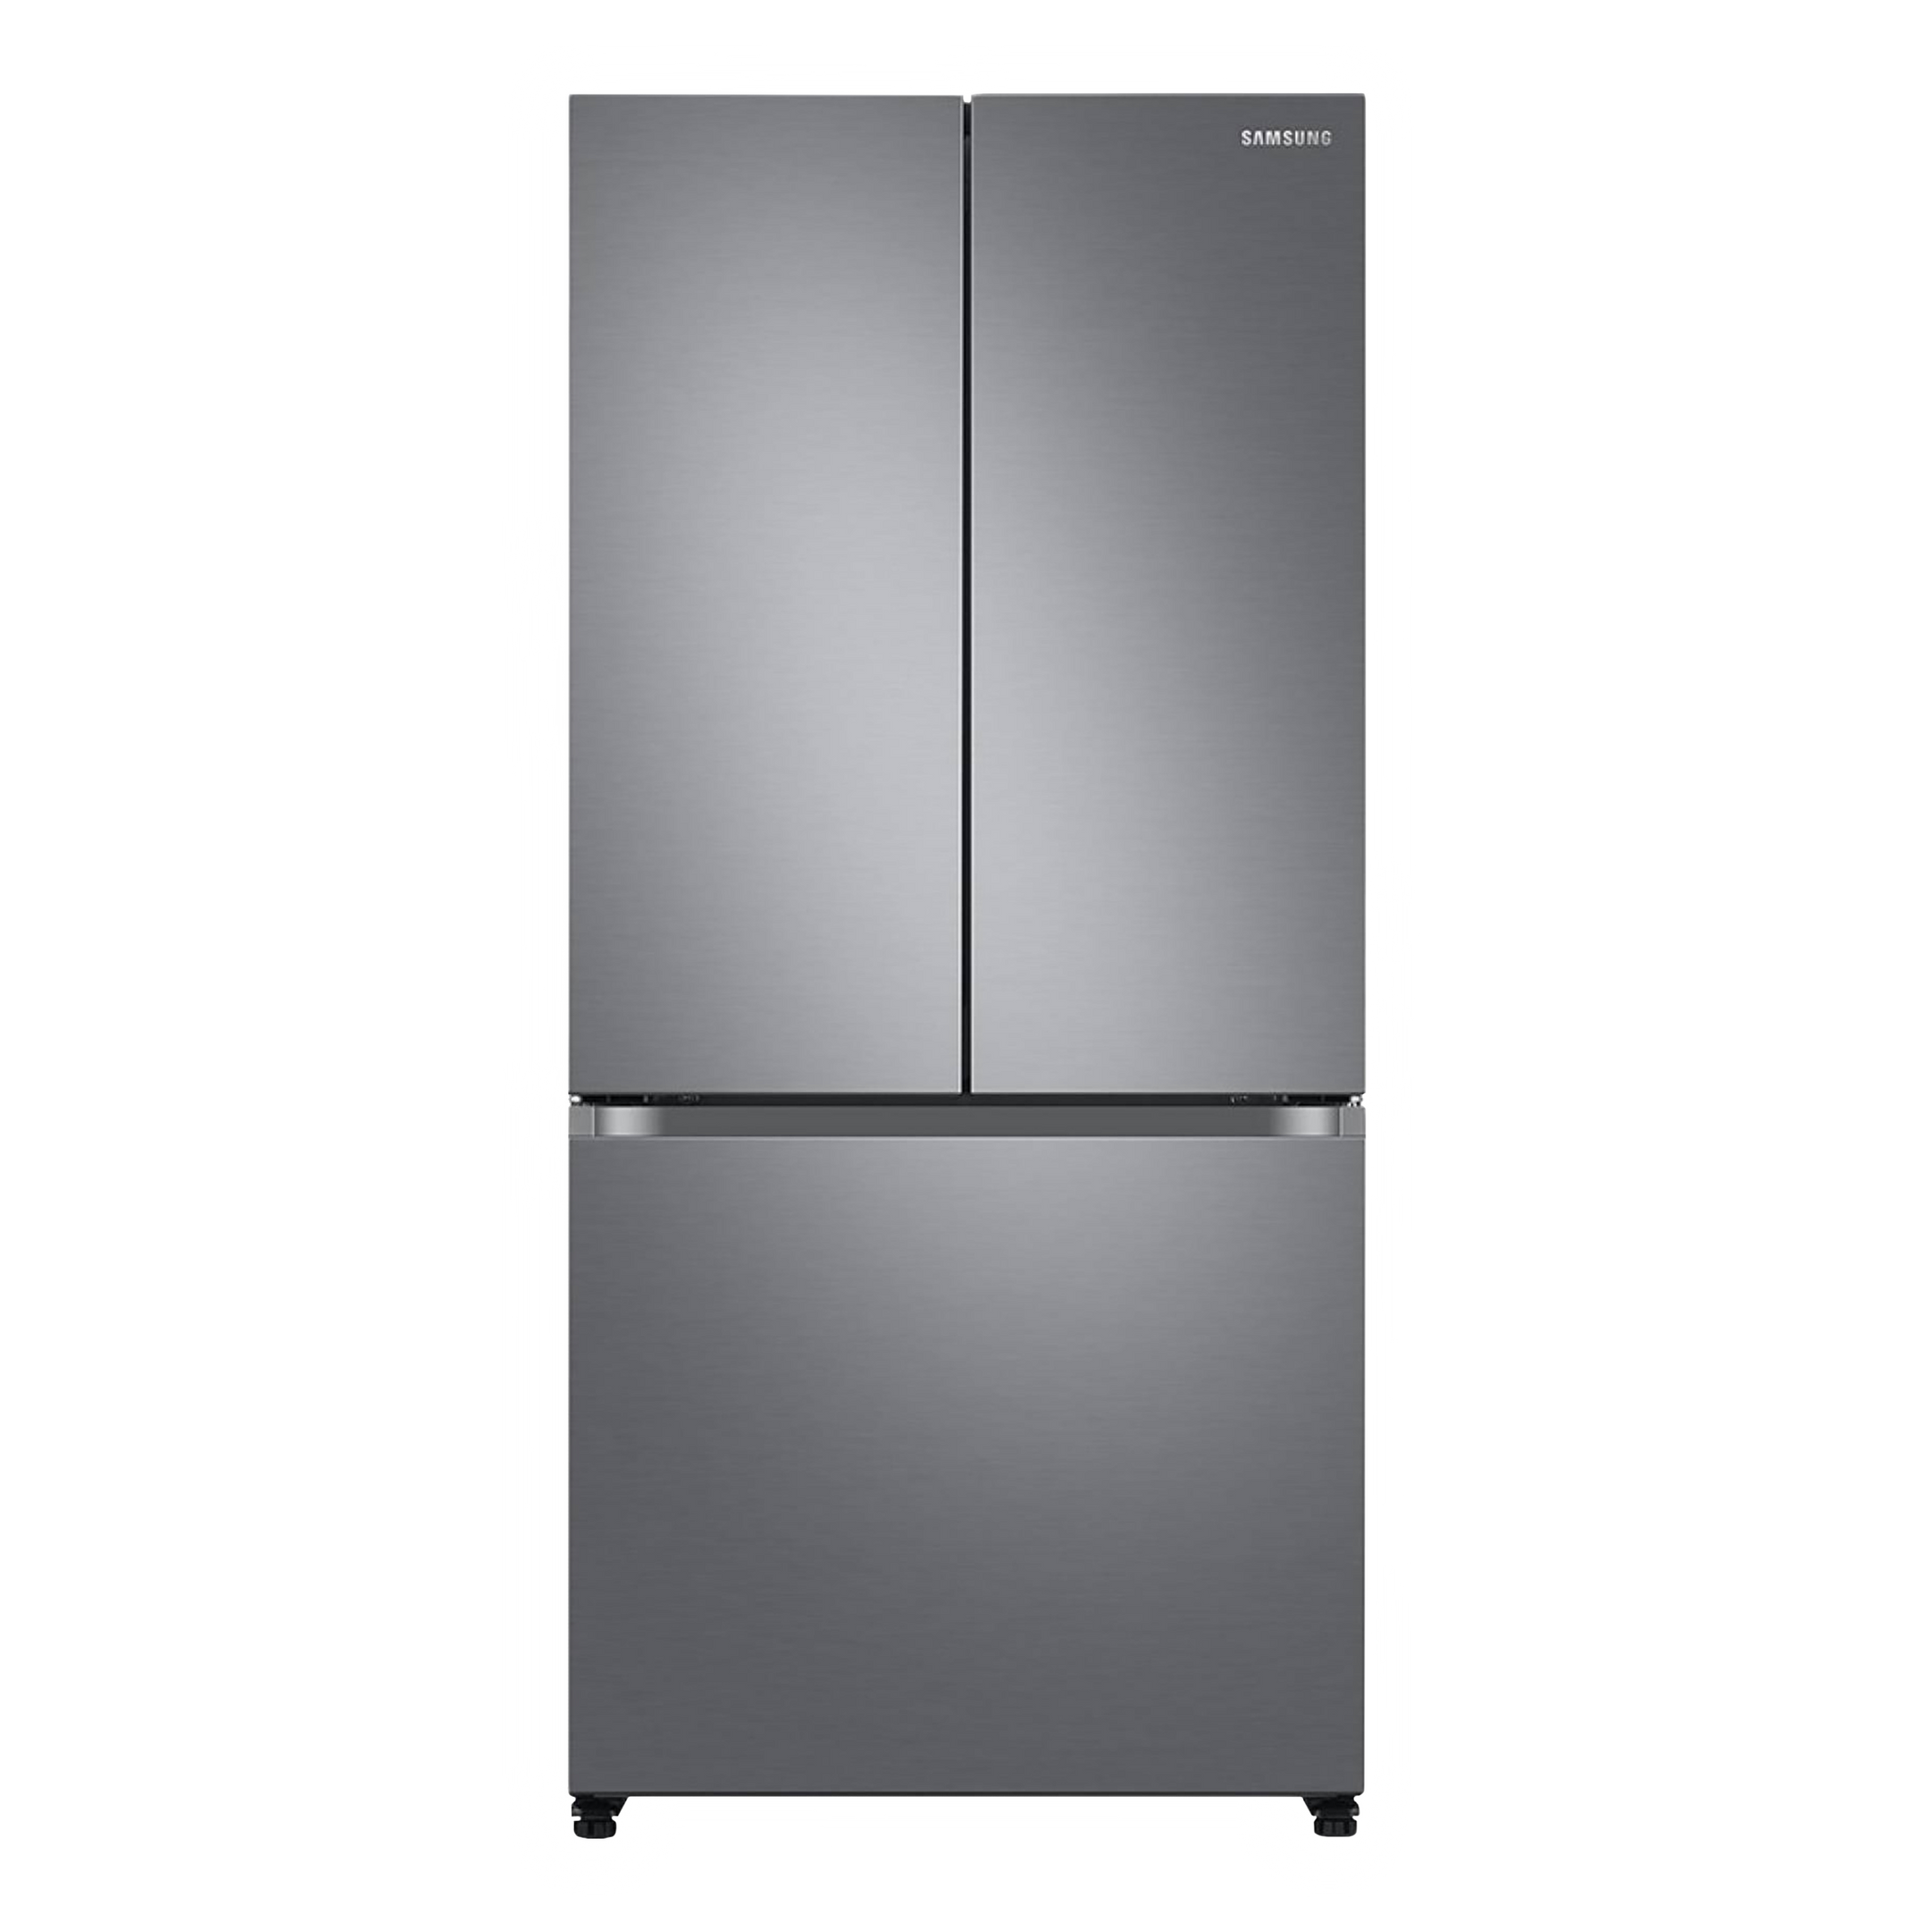 Samsung 580 Litres 4 Star Frost Free French Door Refrigerator (Convertible Freezer, RF57A5032S9/TL, Refined Inox)